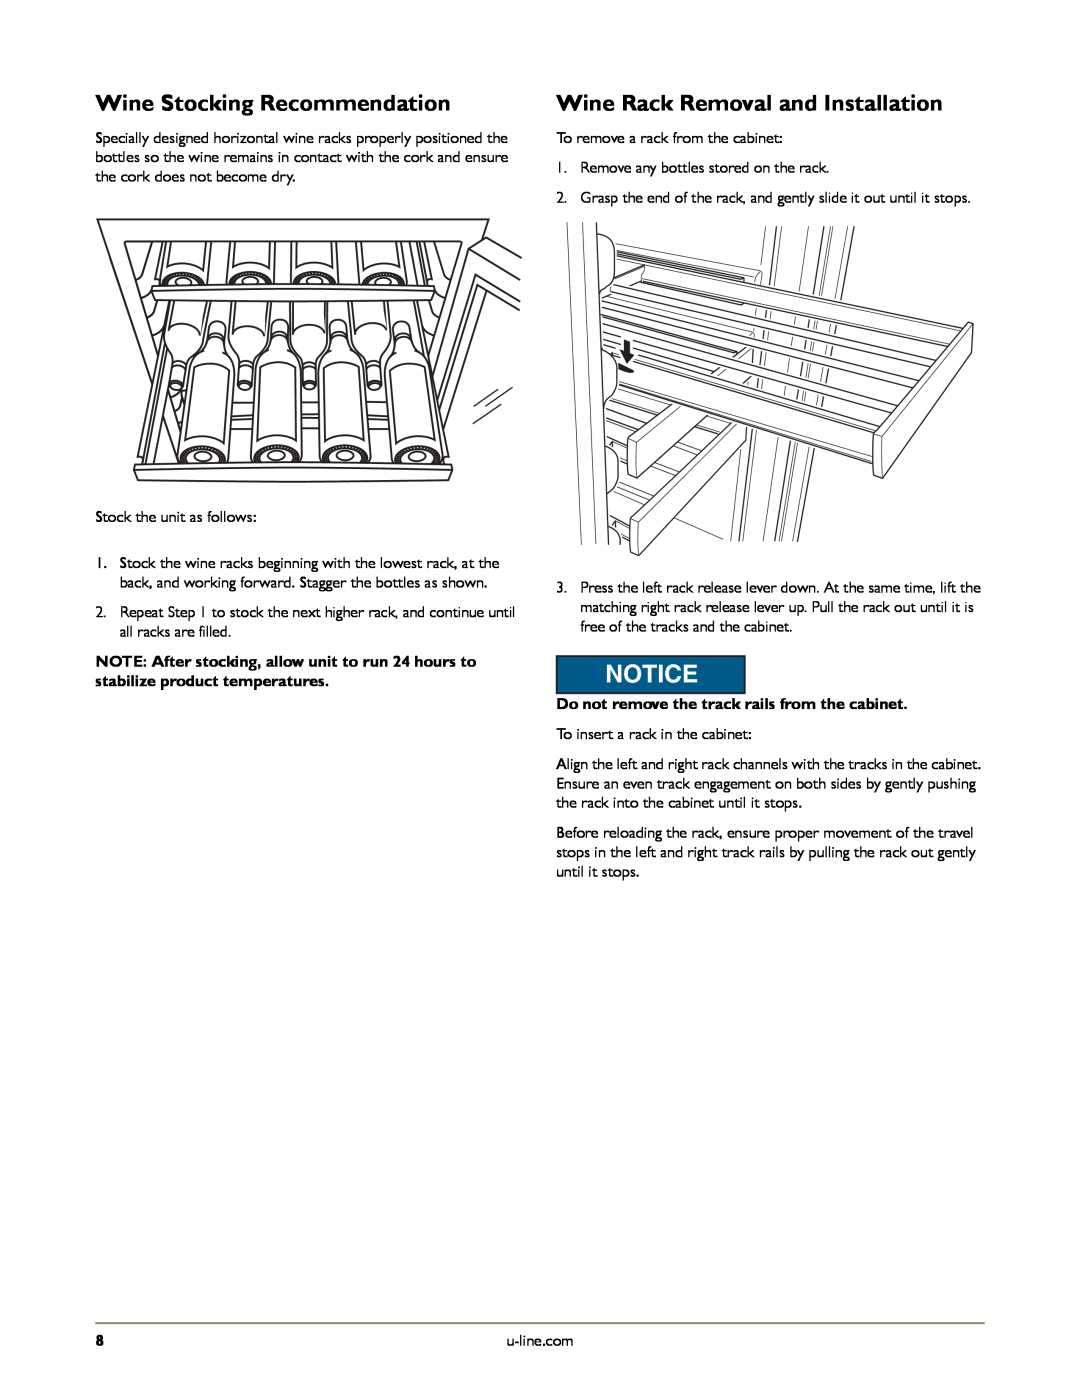 U-Line U-2275ZWCS-00, U-2275ZWCOL-60 manual Wine Stocking Recommendation, Wine Rack Removal and Installation, Notice 